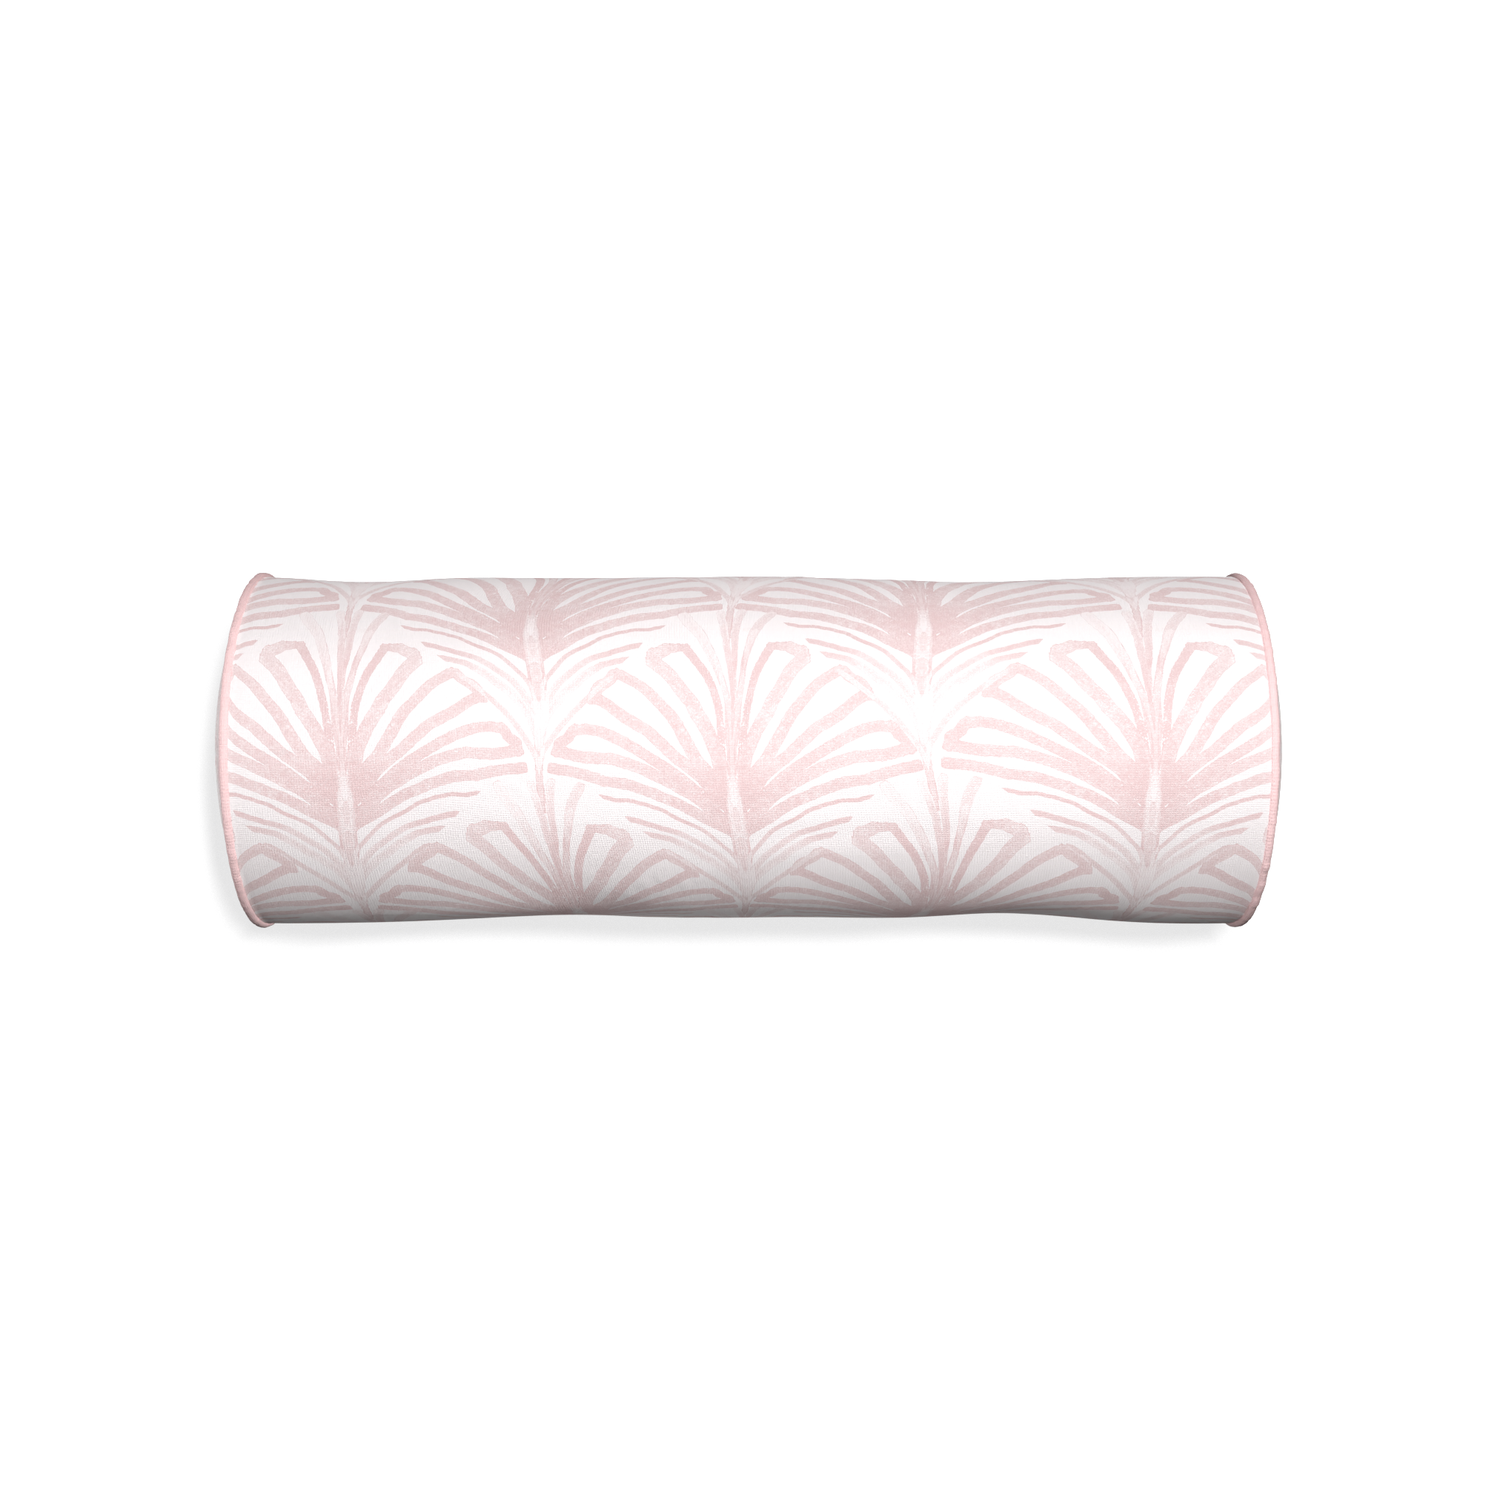 Bolster suzy rose custom pillow with petal piping on white background